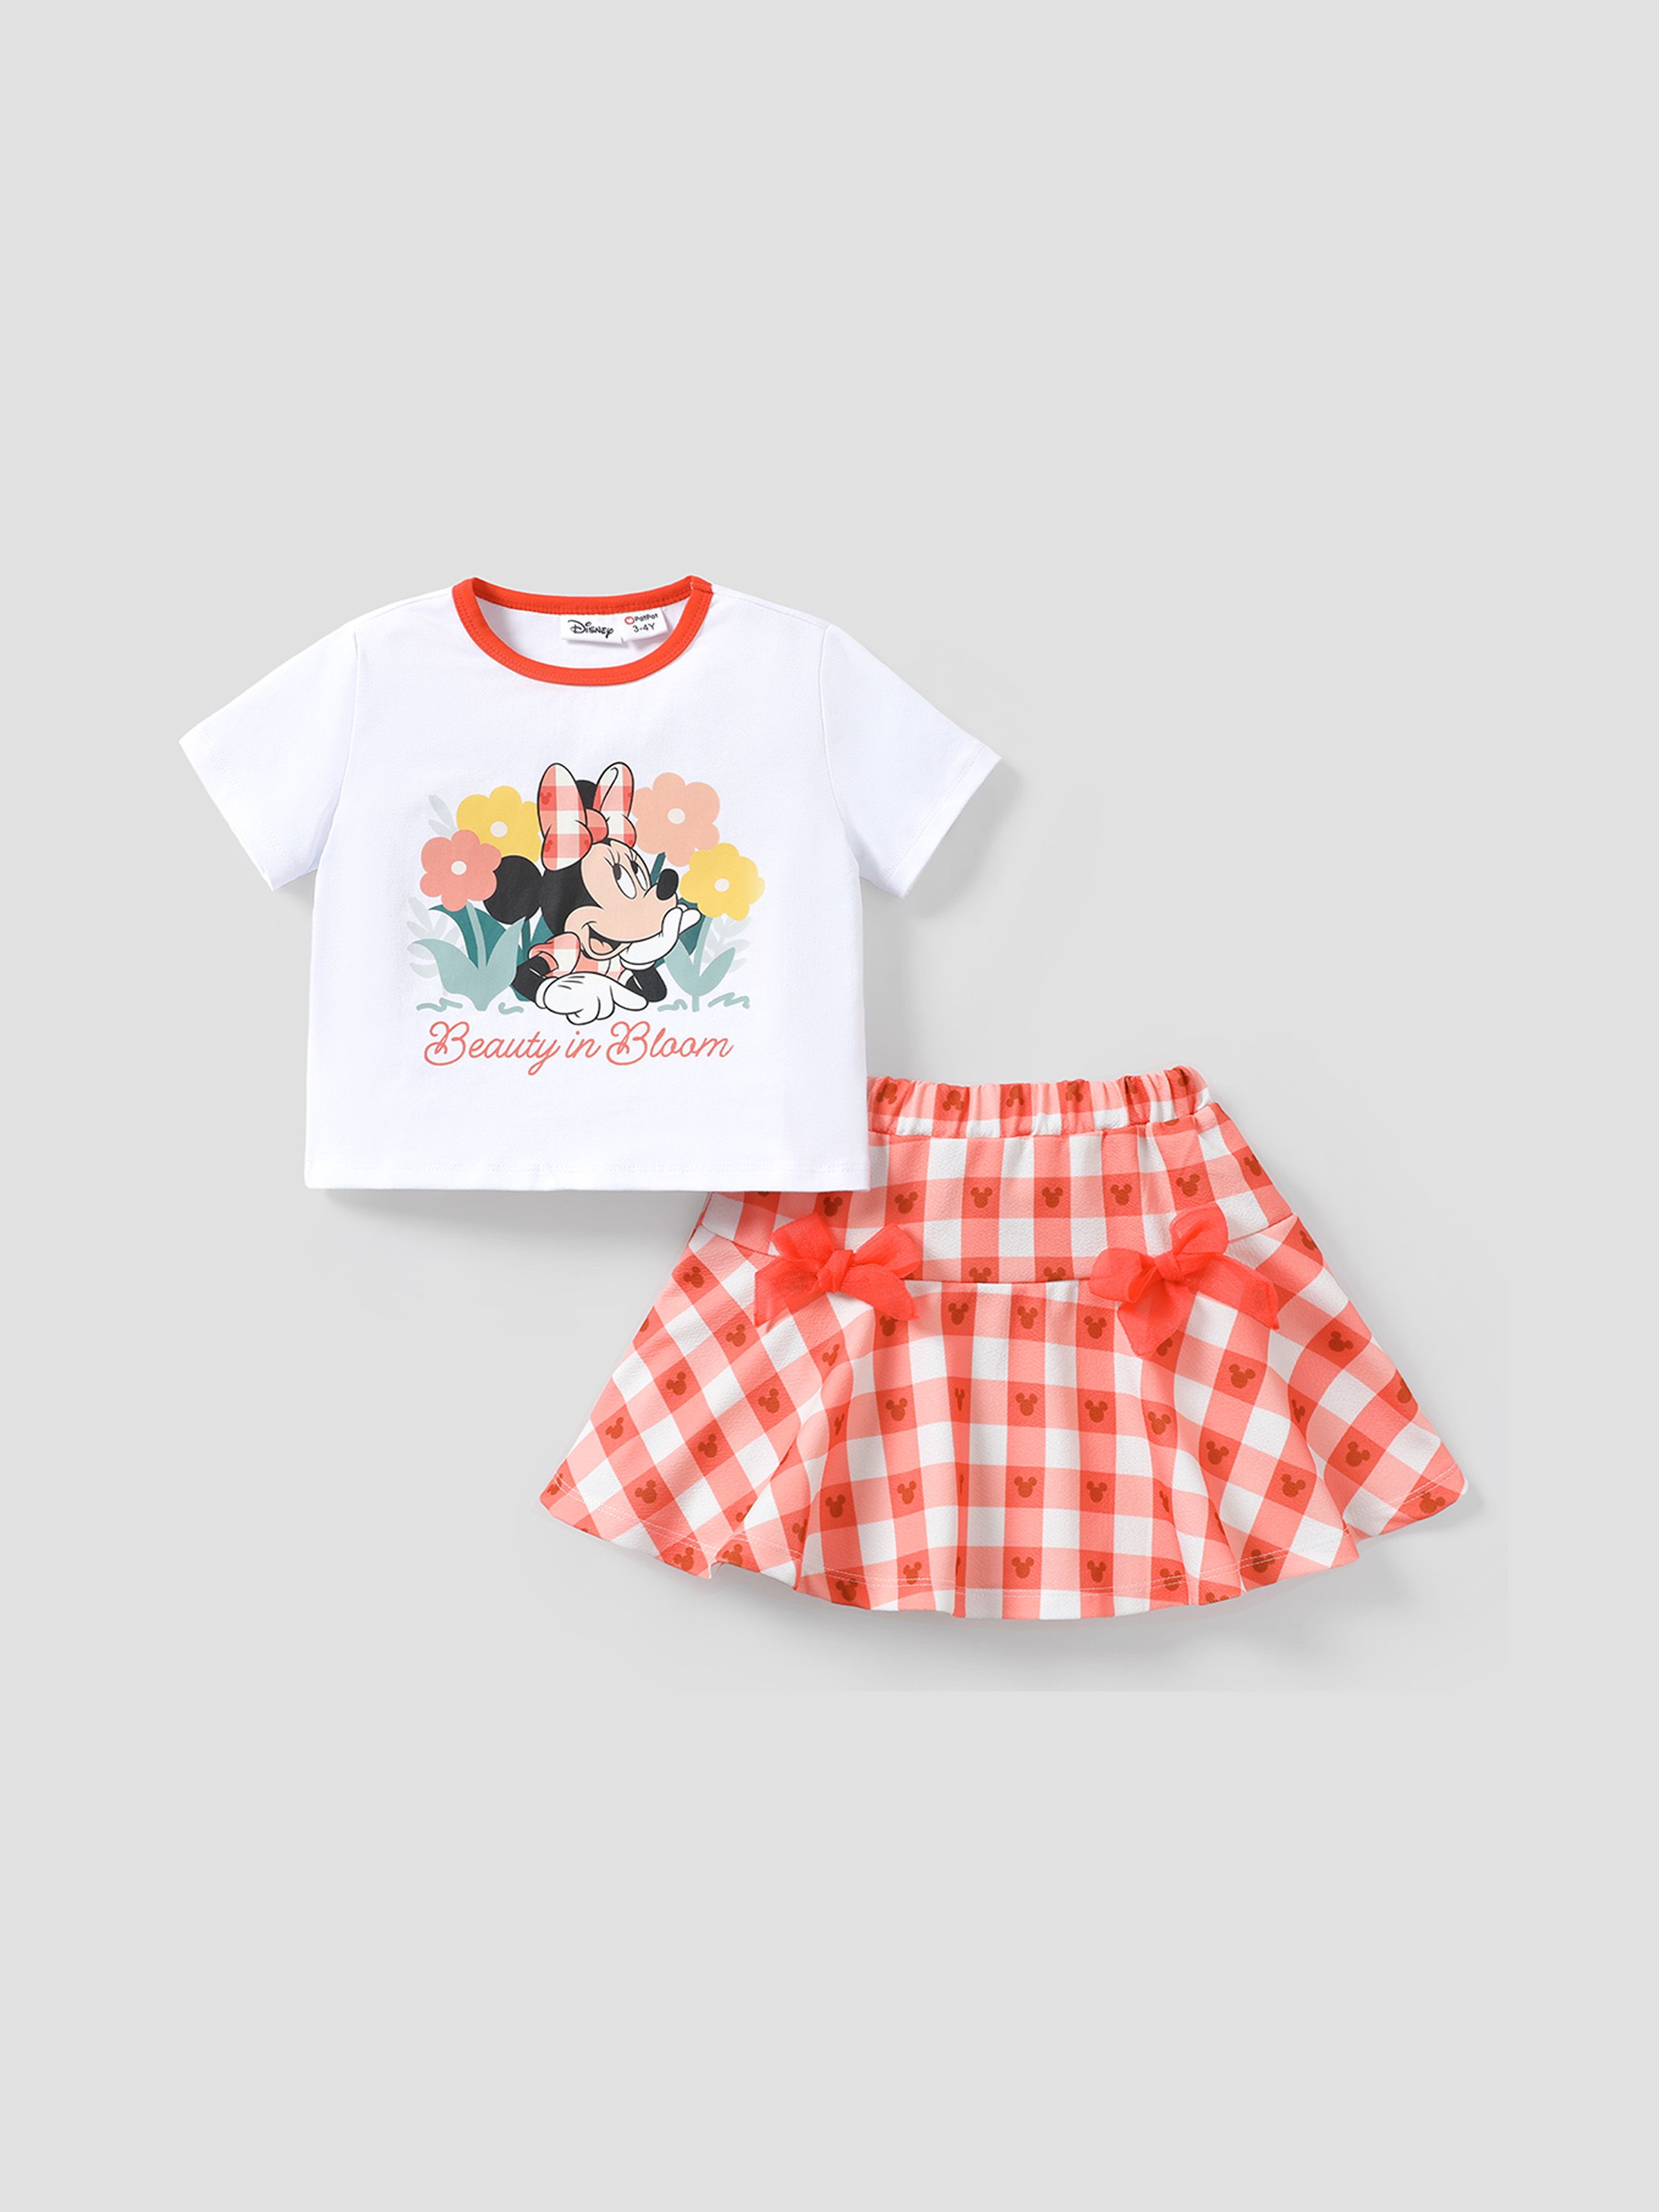 

Disney Mickey and Friends 2pcs Toddler/Kids Girls Chracter Floral Print T-shirt with Bowknot Checked Skirt Set